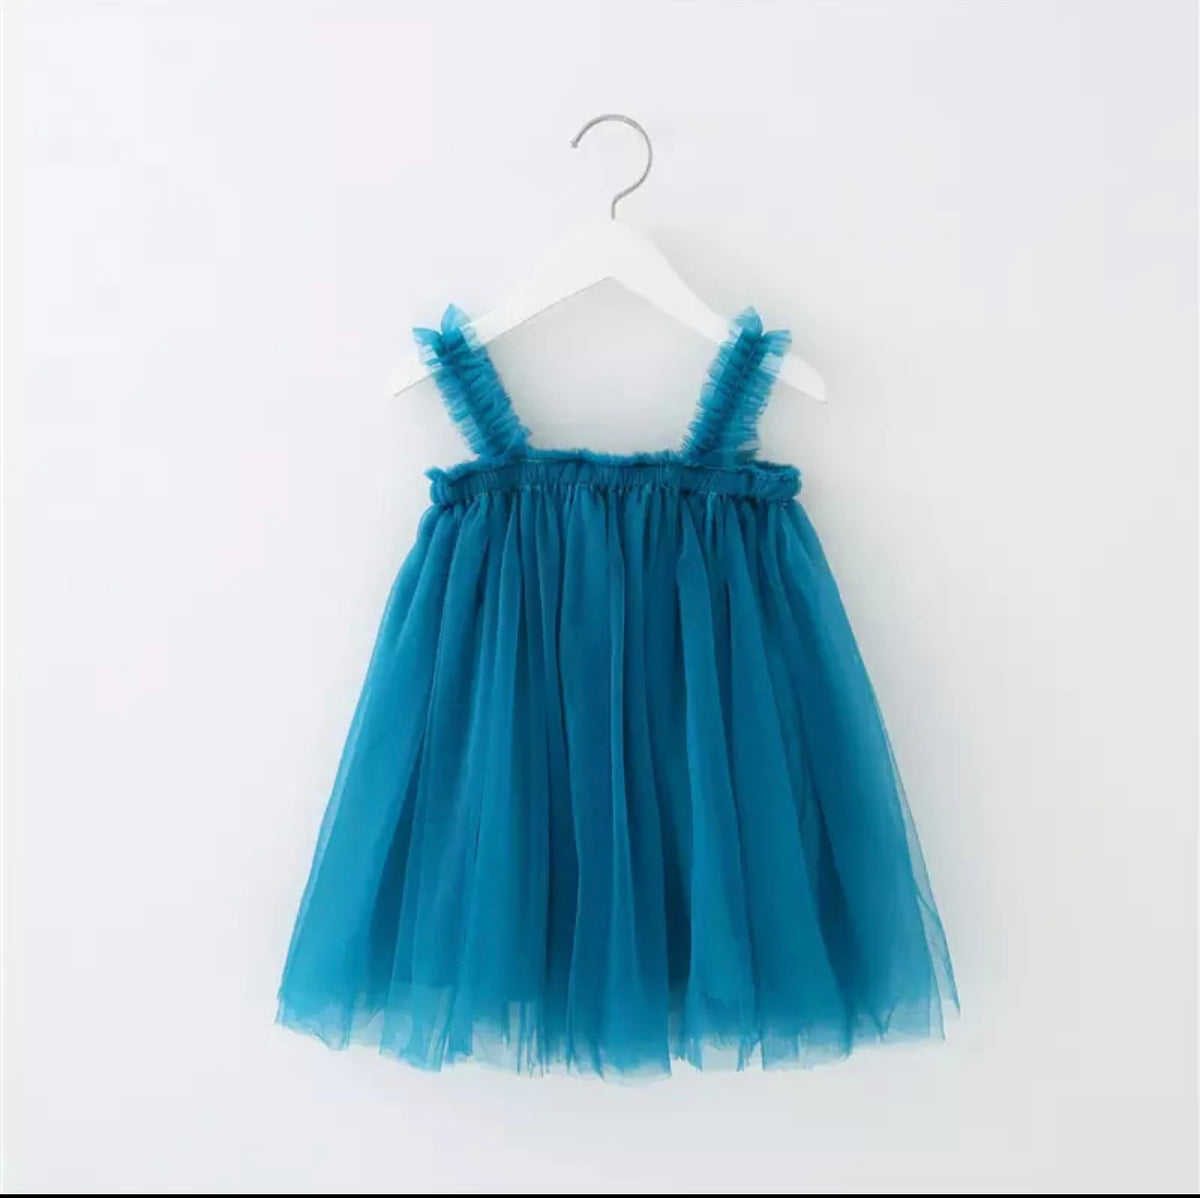 Tulle Dreams Dress in Turquoise Blue